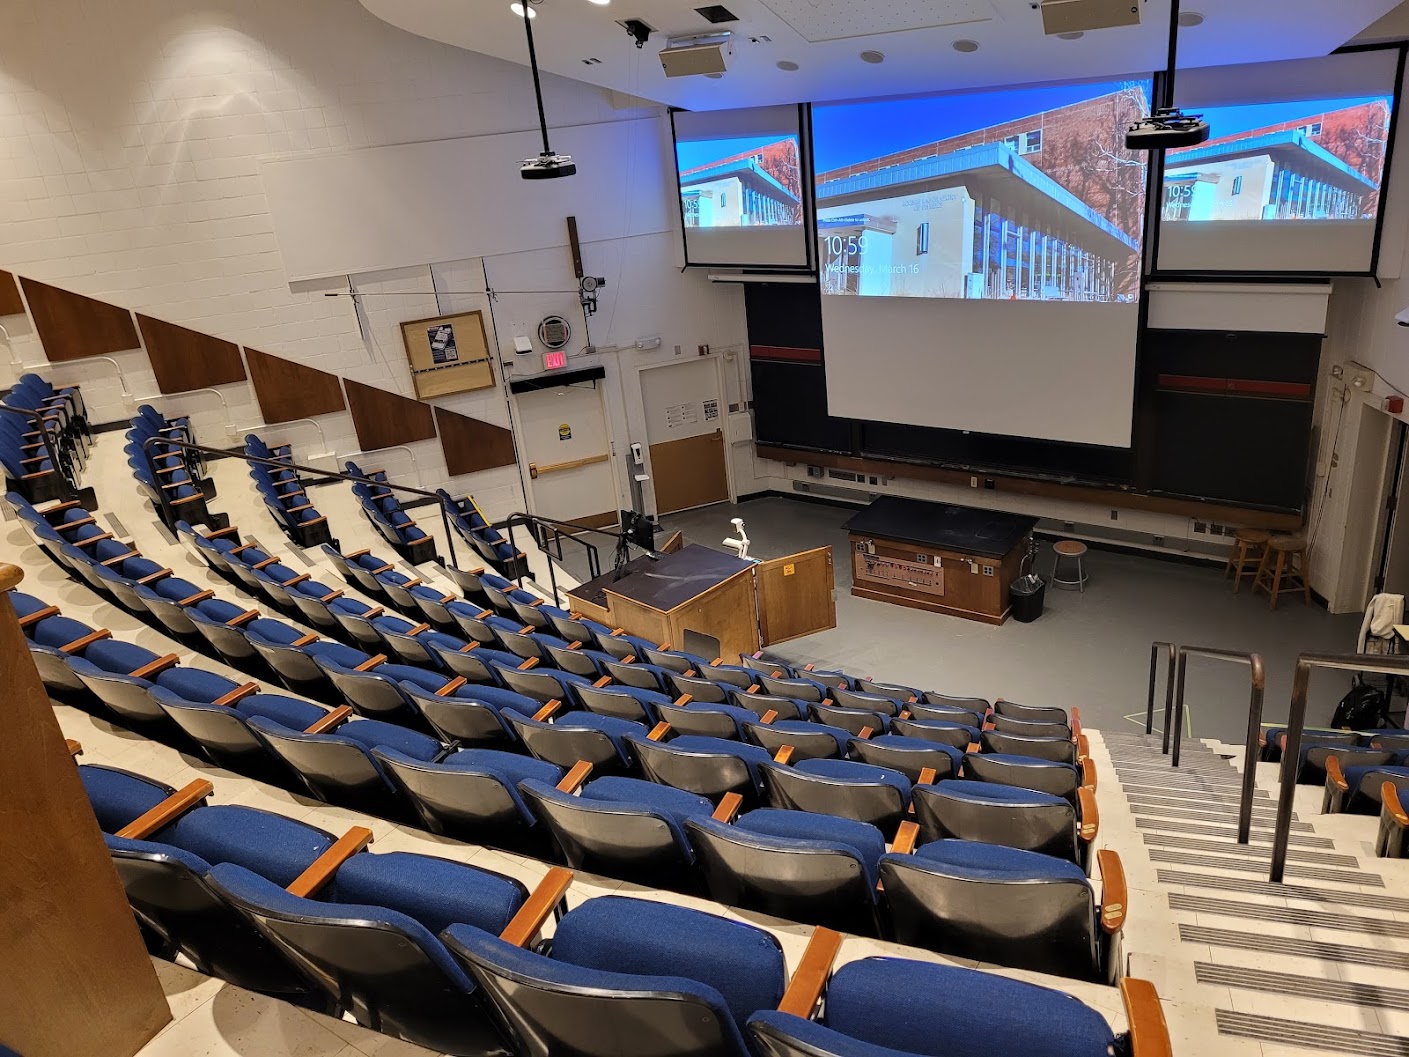 A view of the classroom with Theater Auditorium seating, chalk boards, projection screens, and instructor table in front.